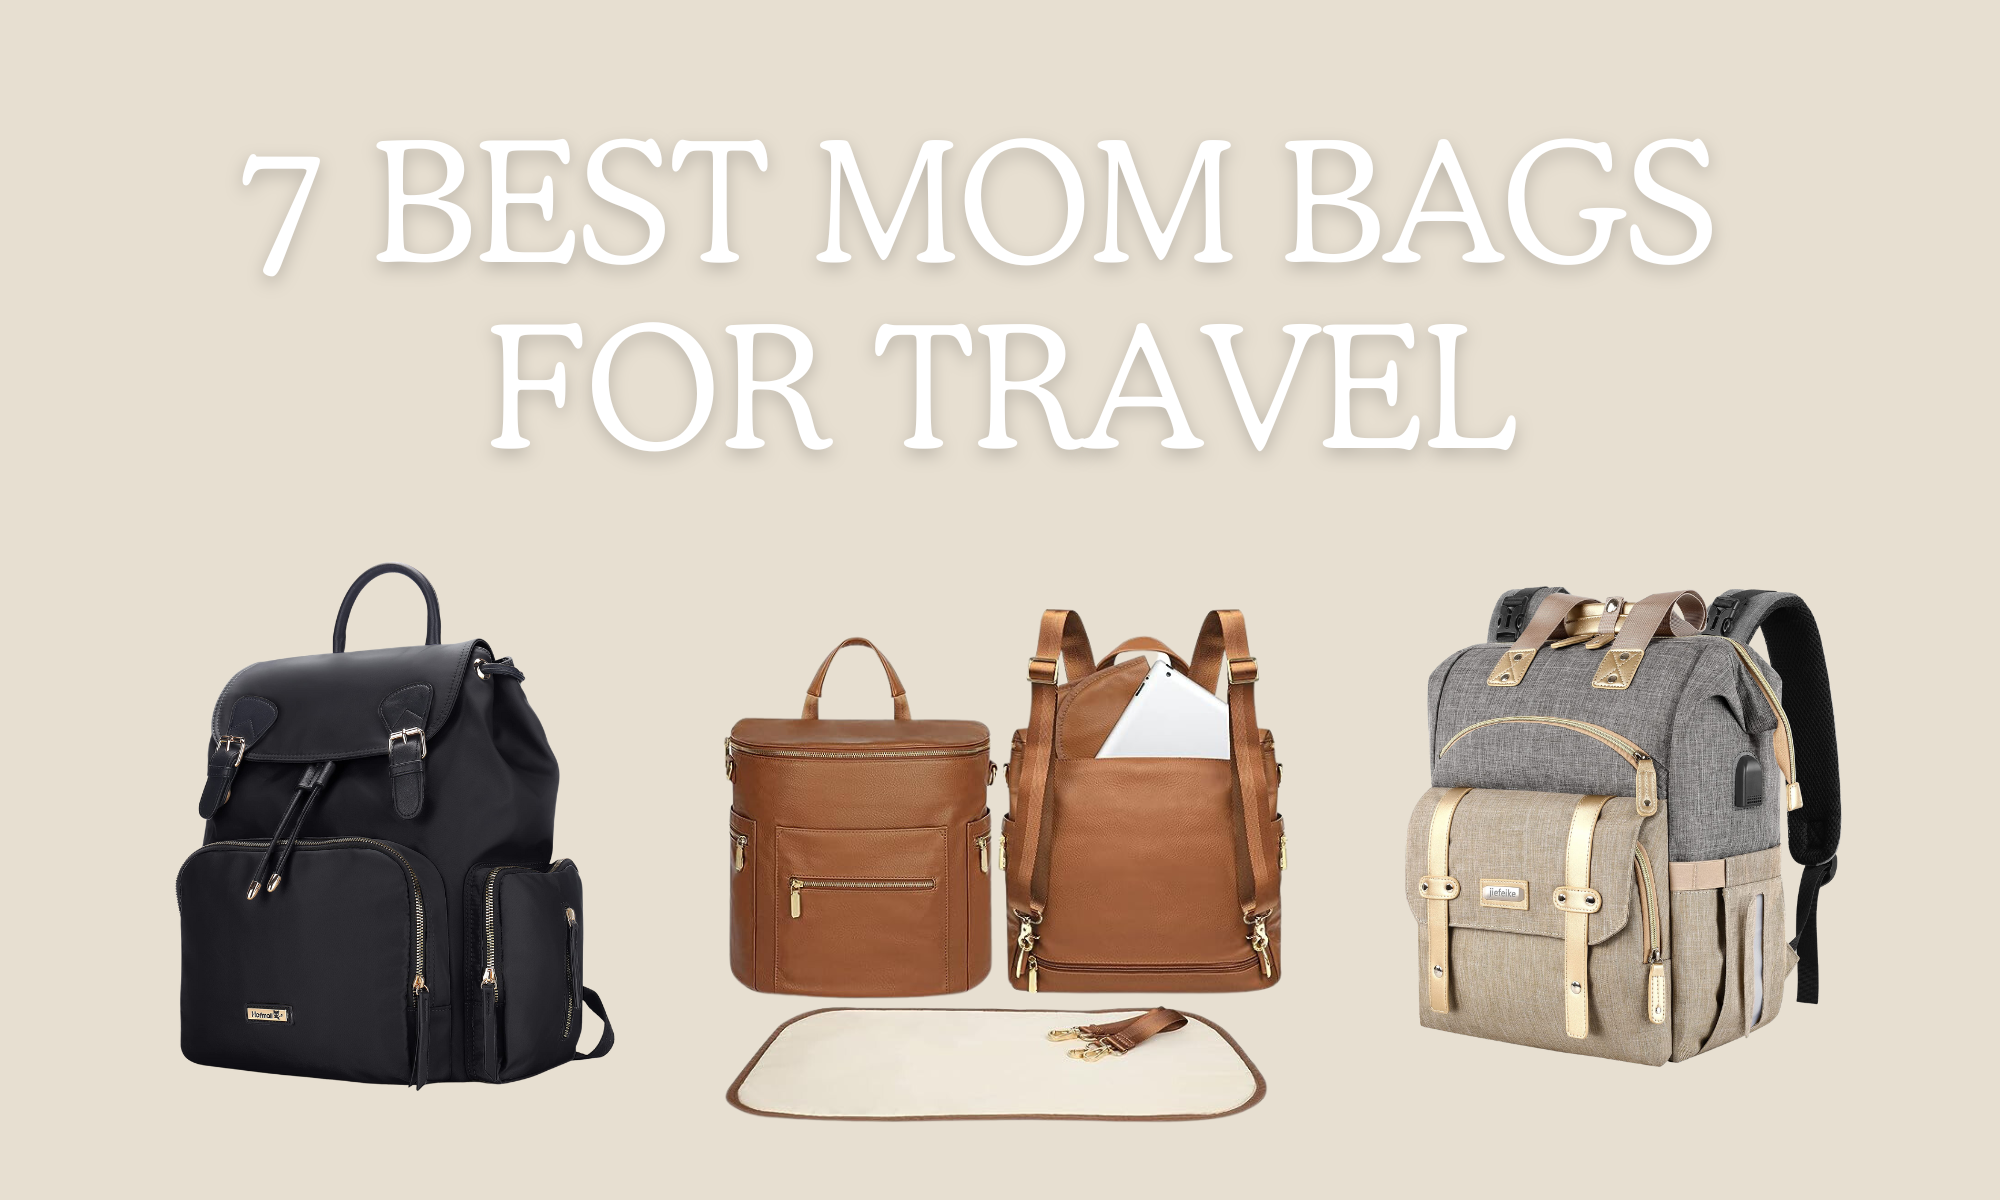 7 best mom bags for travel
